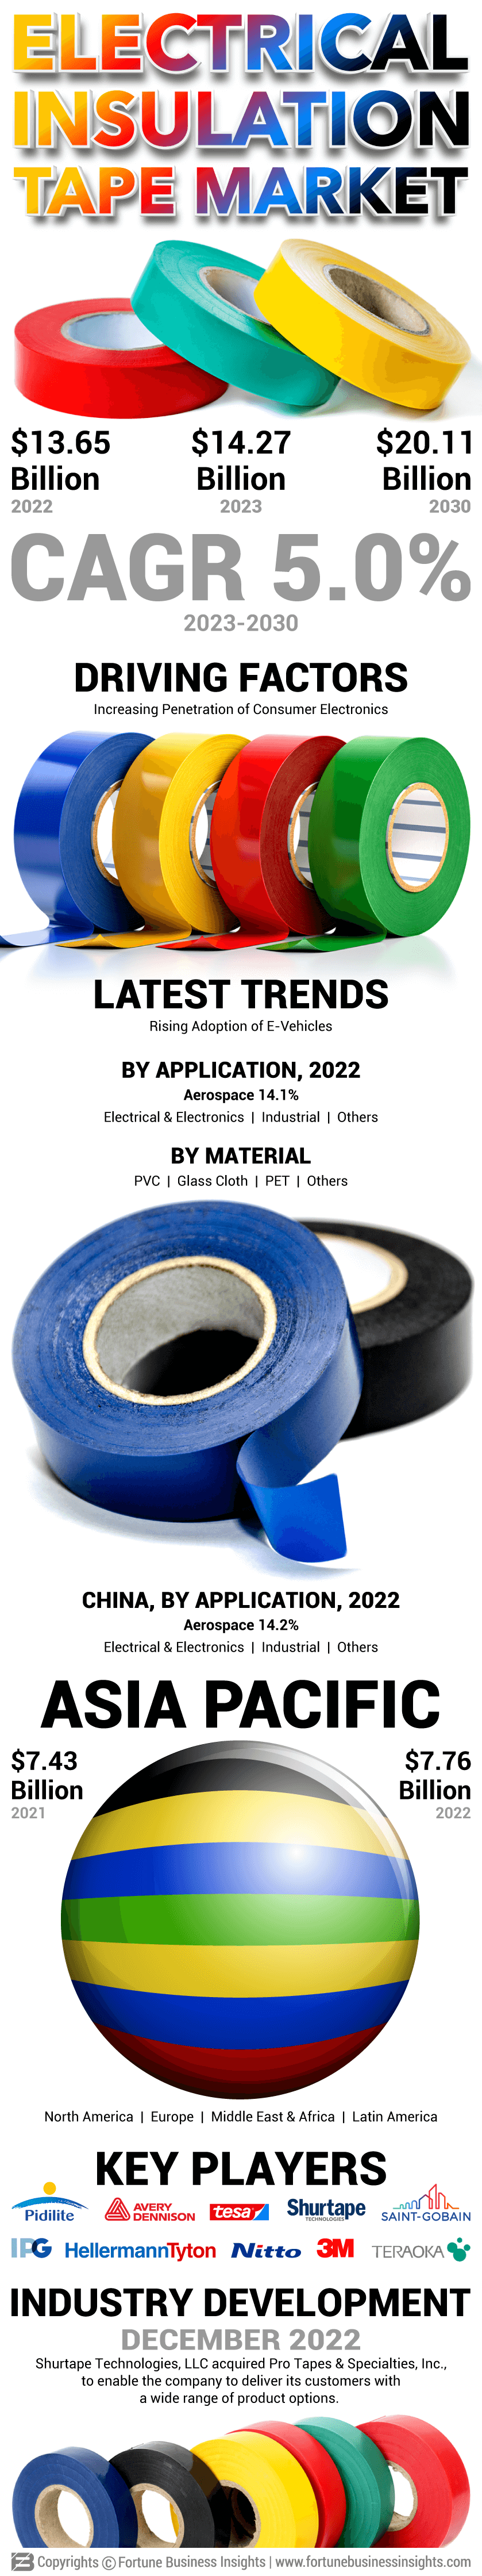 Electrical Insulation Tape Market 